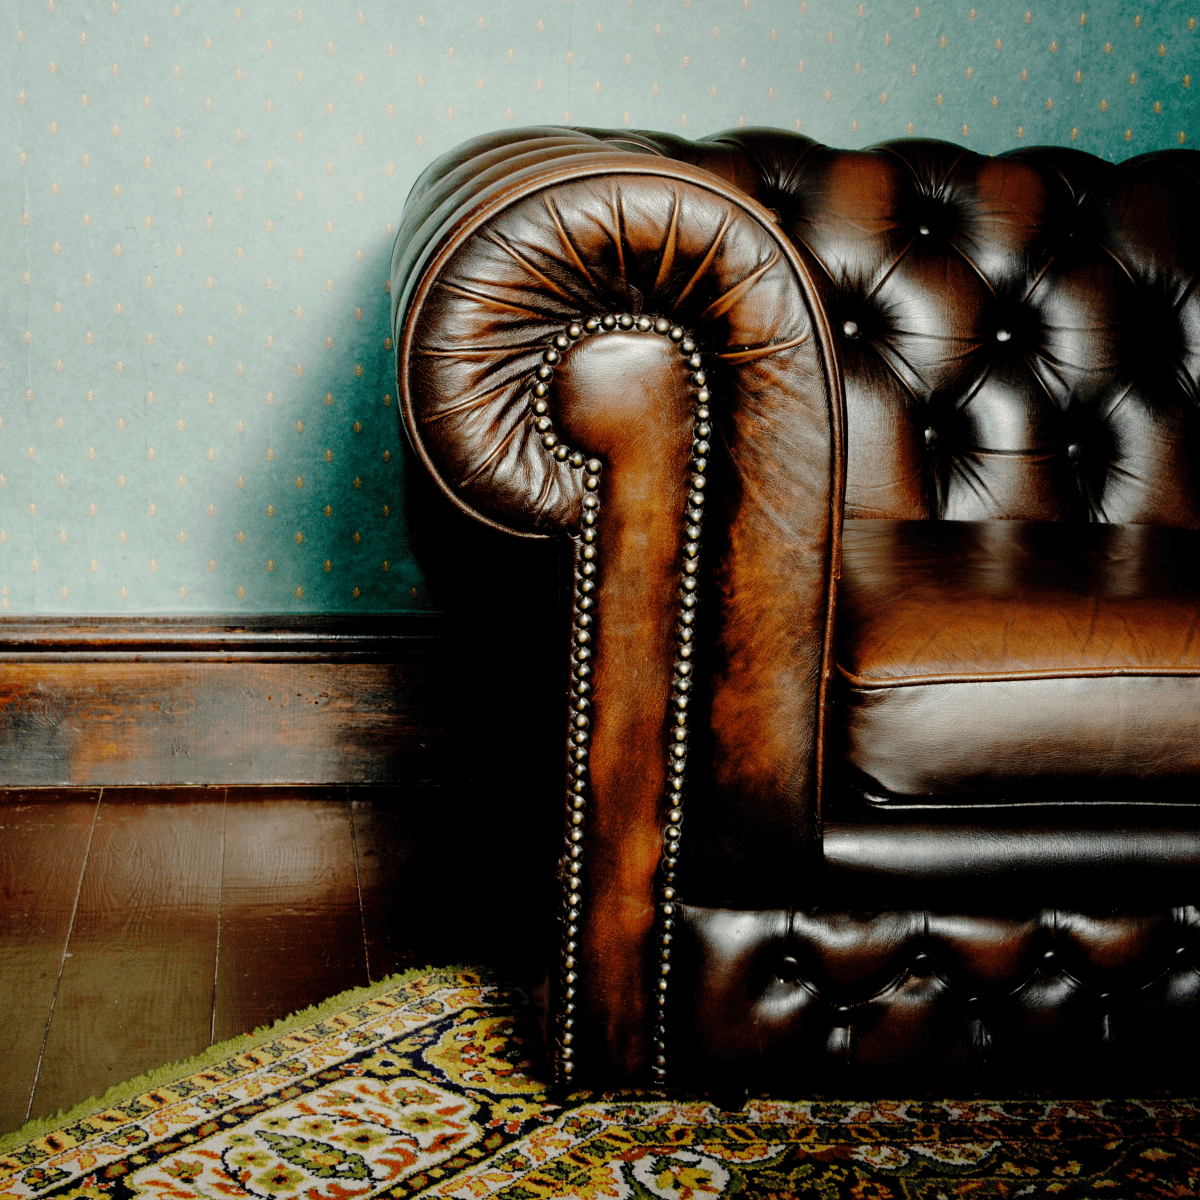 How to Paint Leather Furniture Properly & Effectively